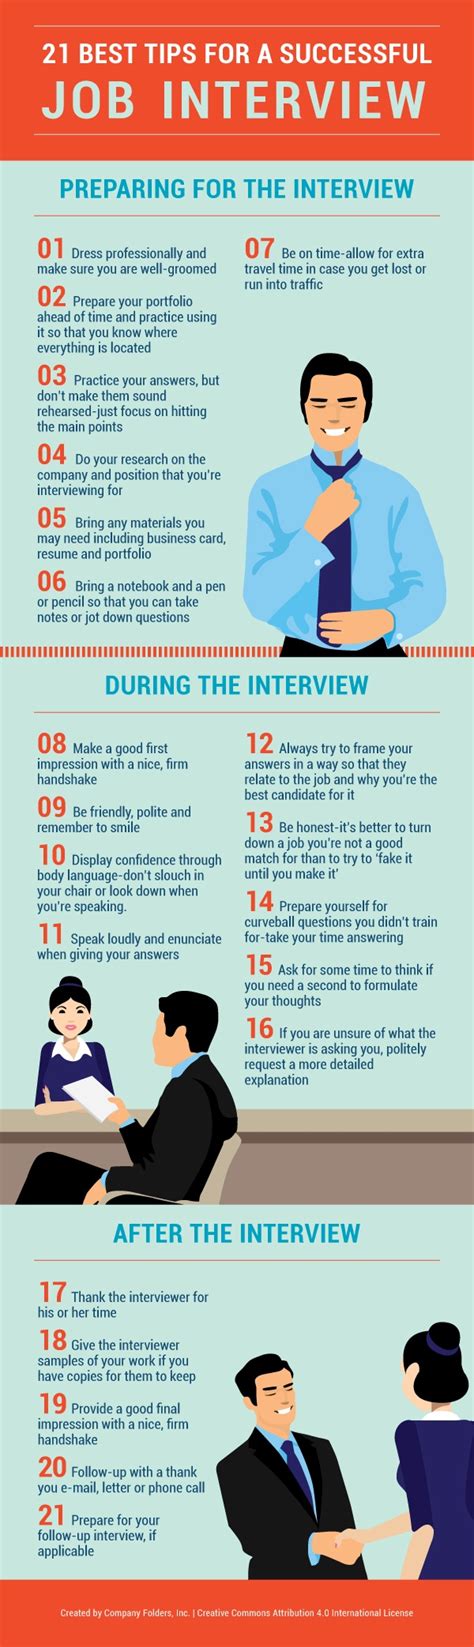 Tips Sukses Interview